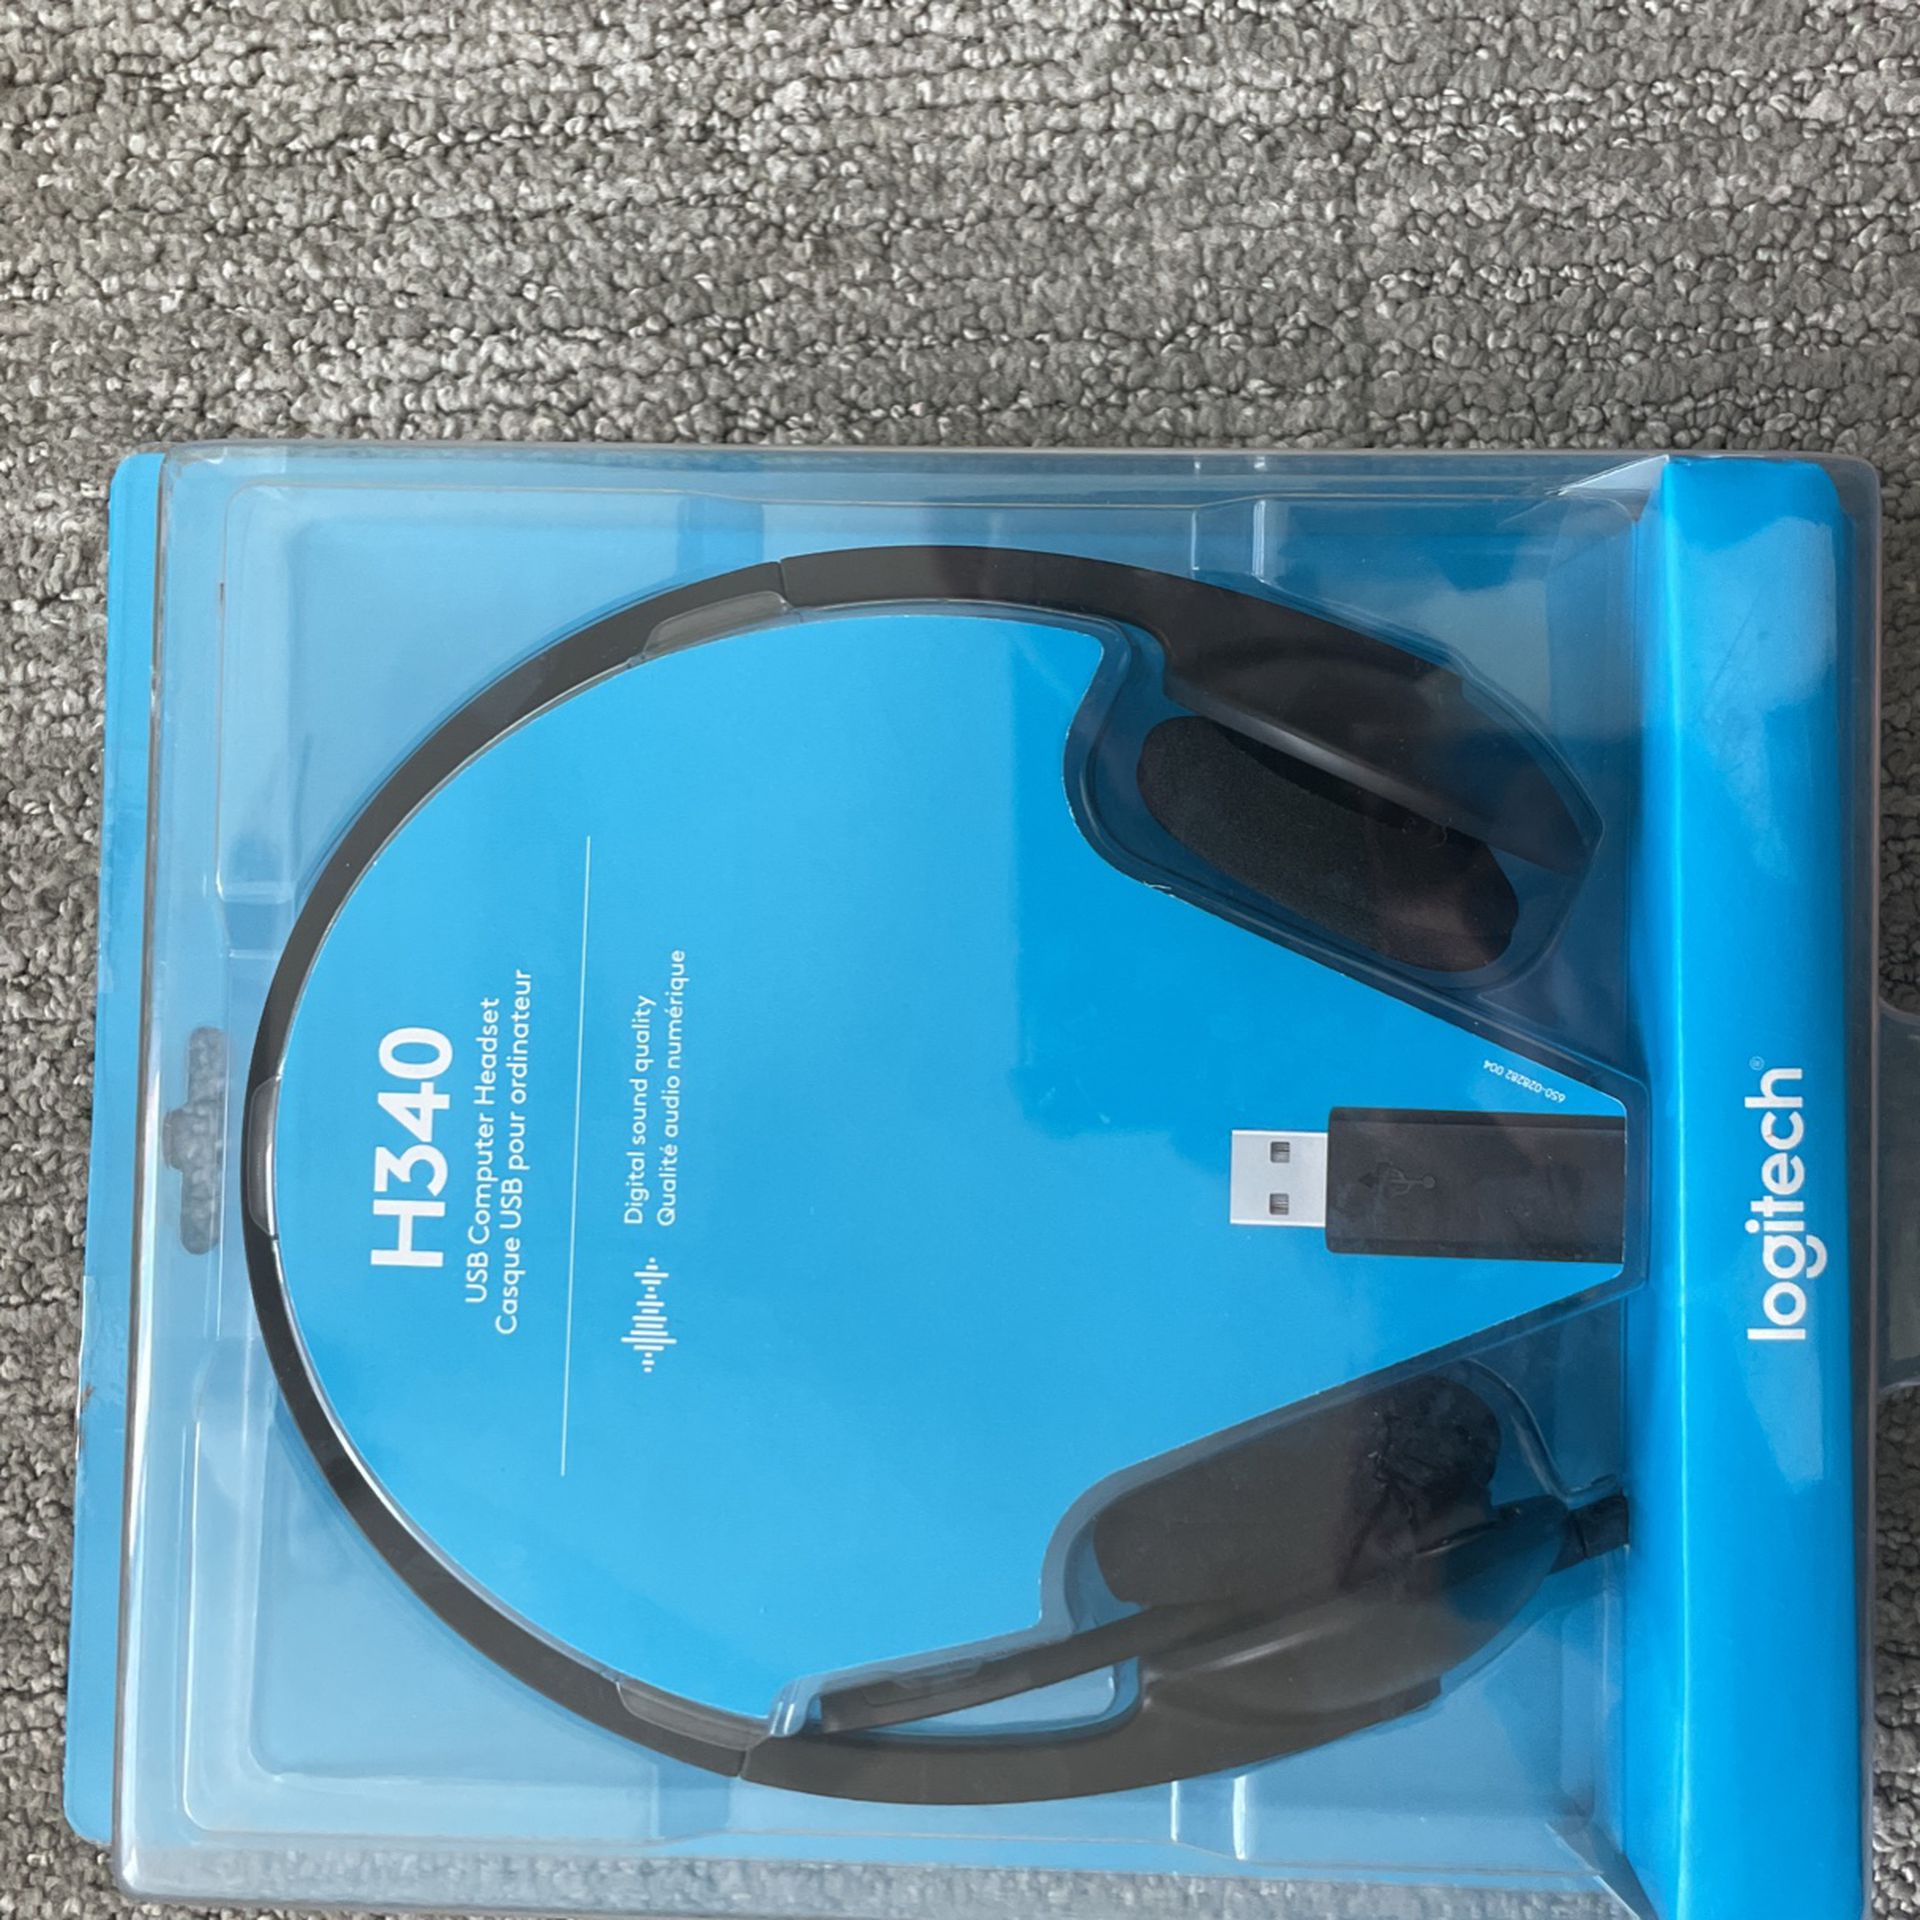 Logitech Usb  Headset With Microphone 